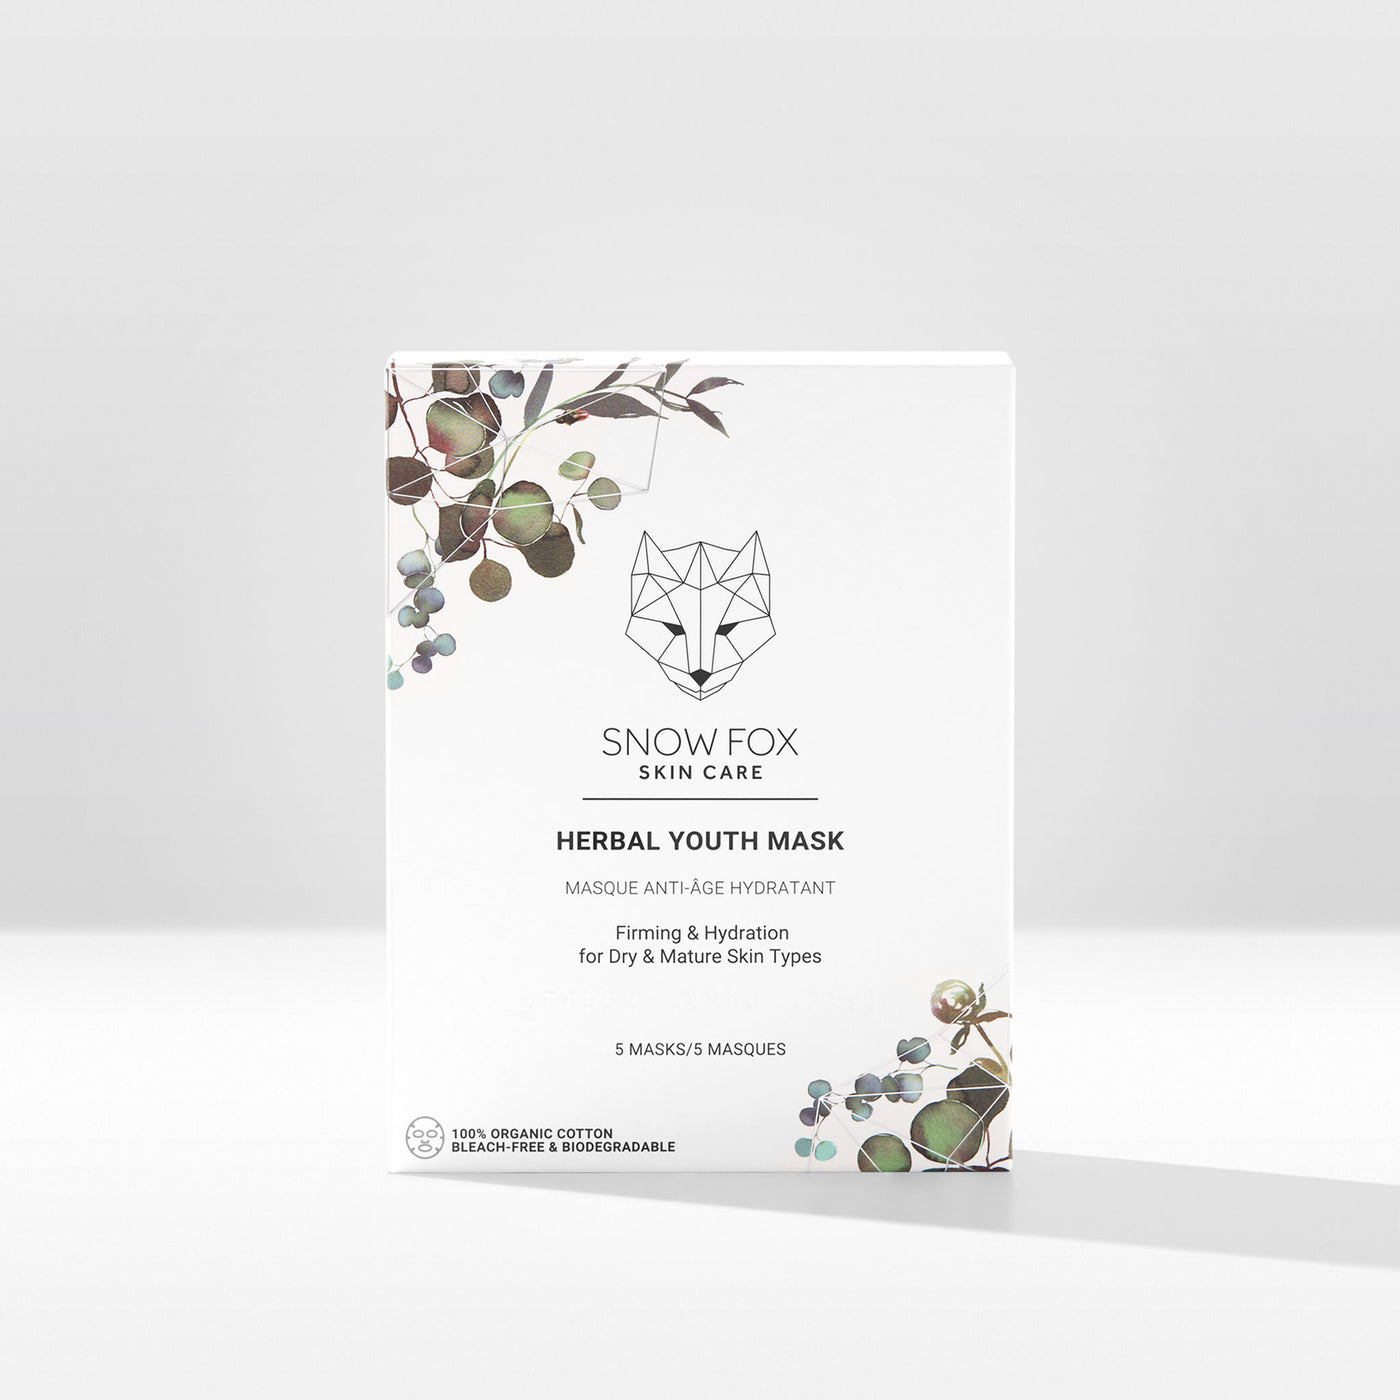 Herbal Youth Mask